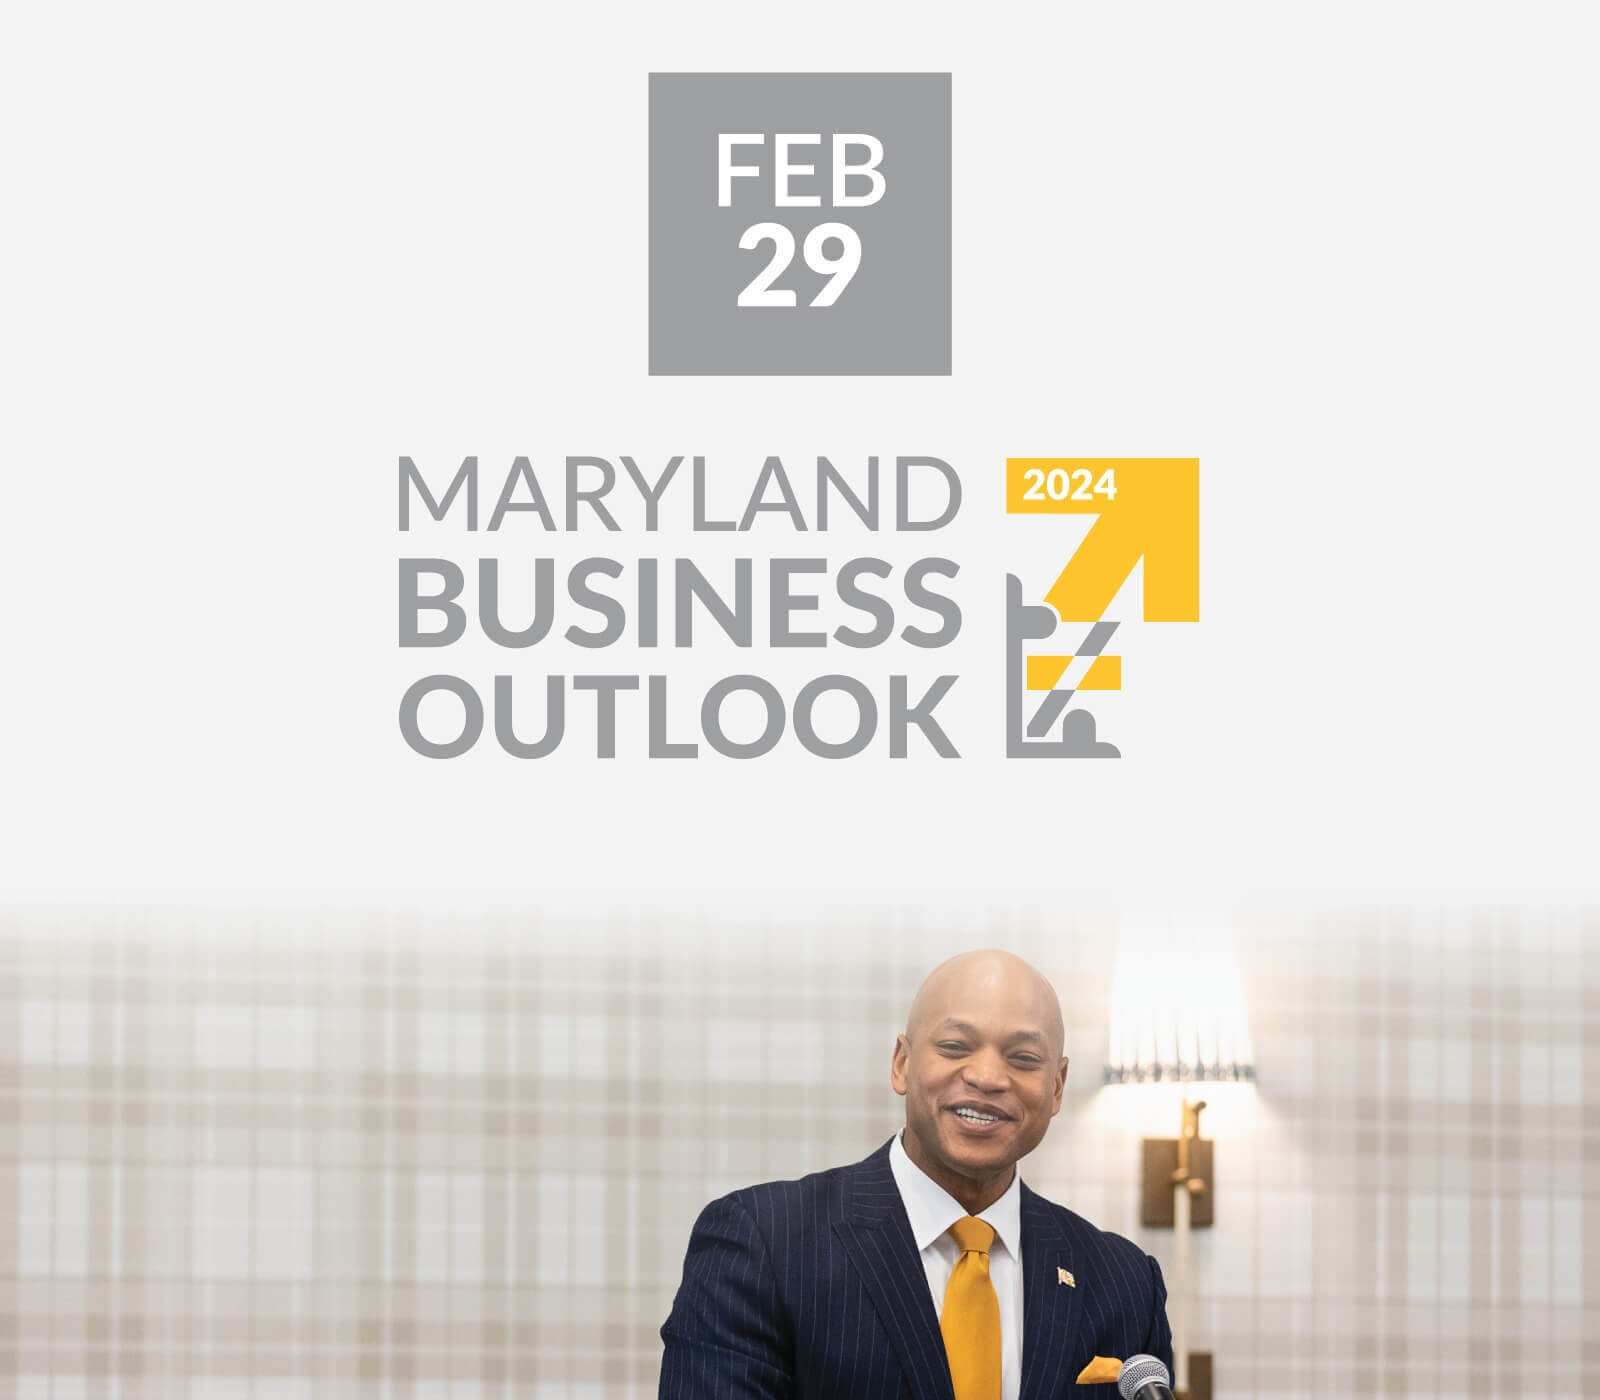 A gray color overlaying a photo showing Maryland Governor Wes Moore speaking from a podium. The text reads Feb 29 with the Maryland Business Outlook 2024 event logo.